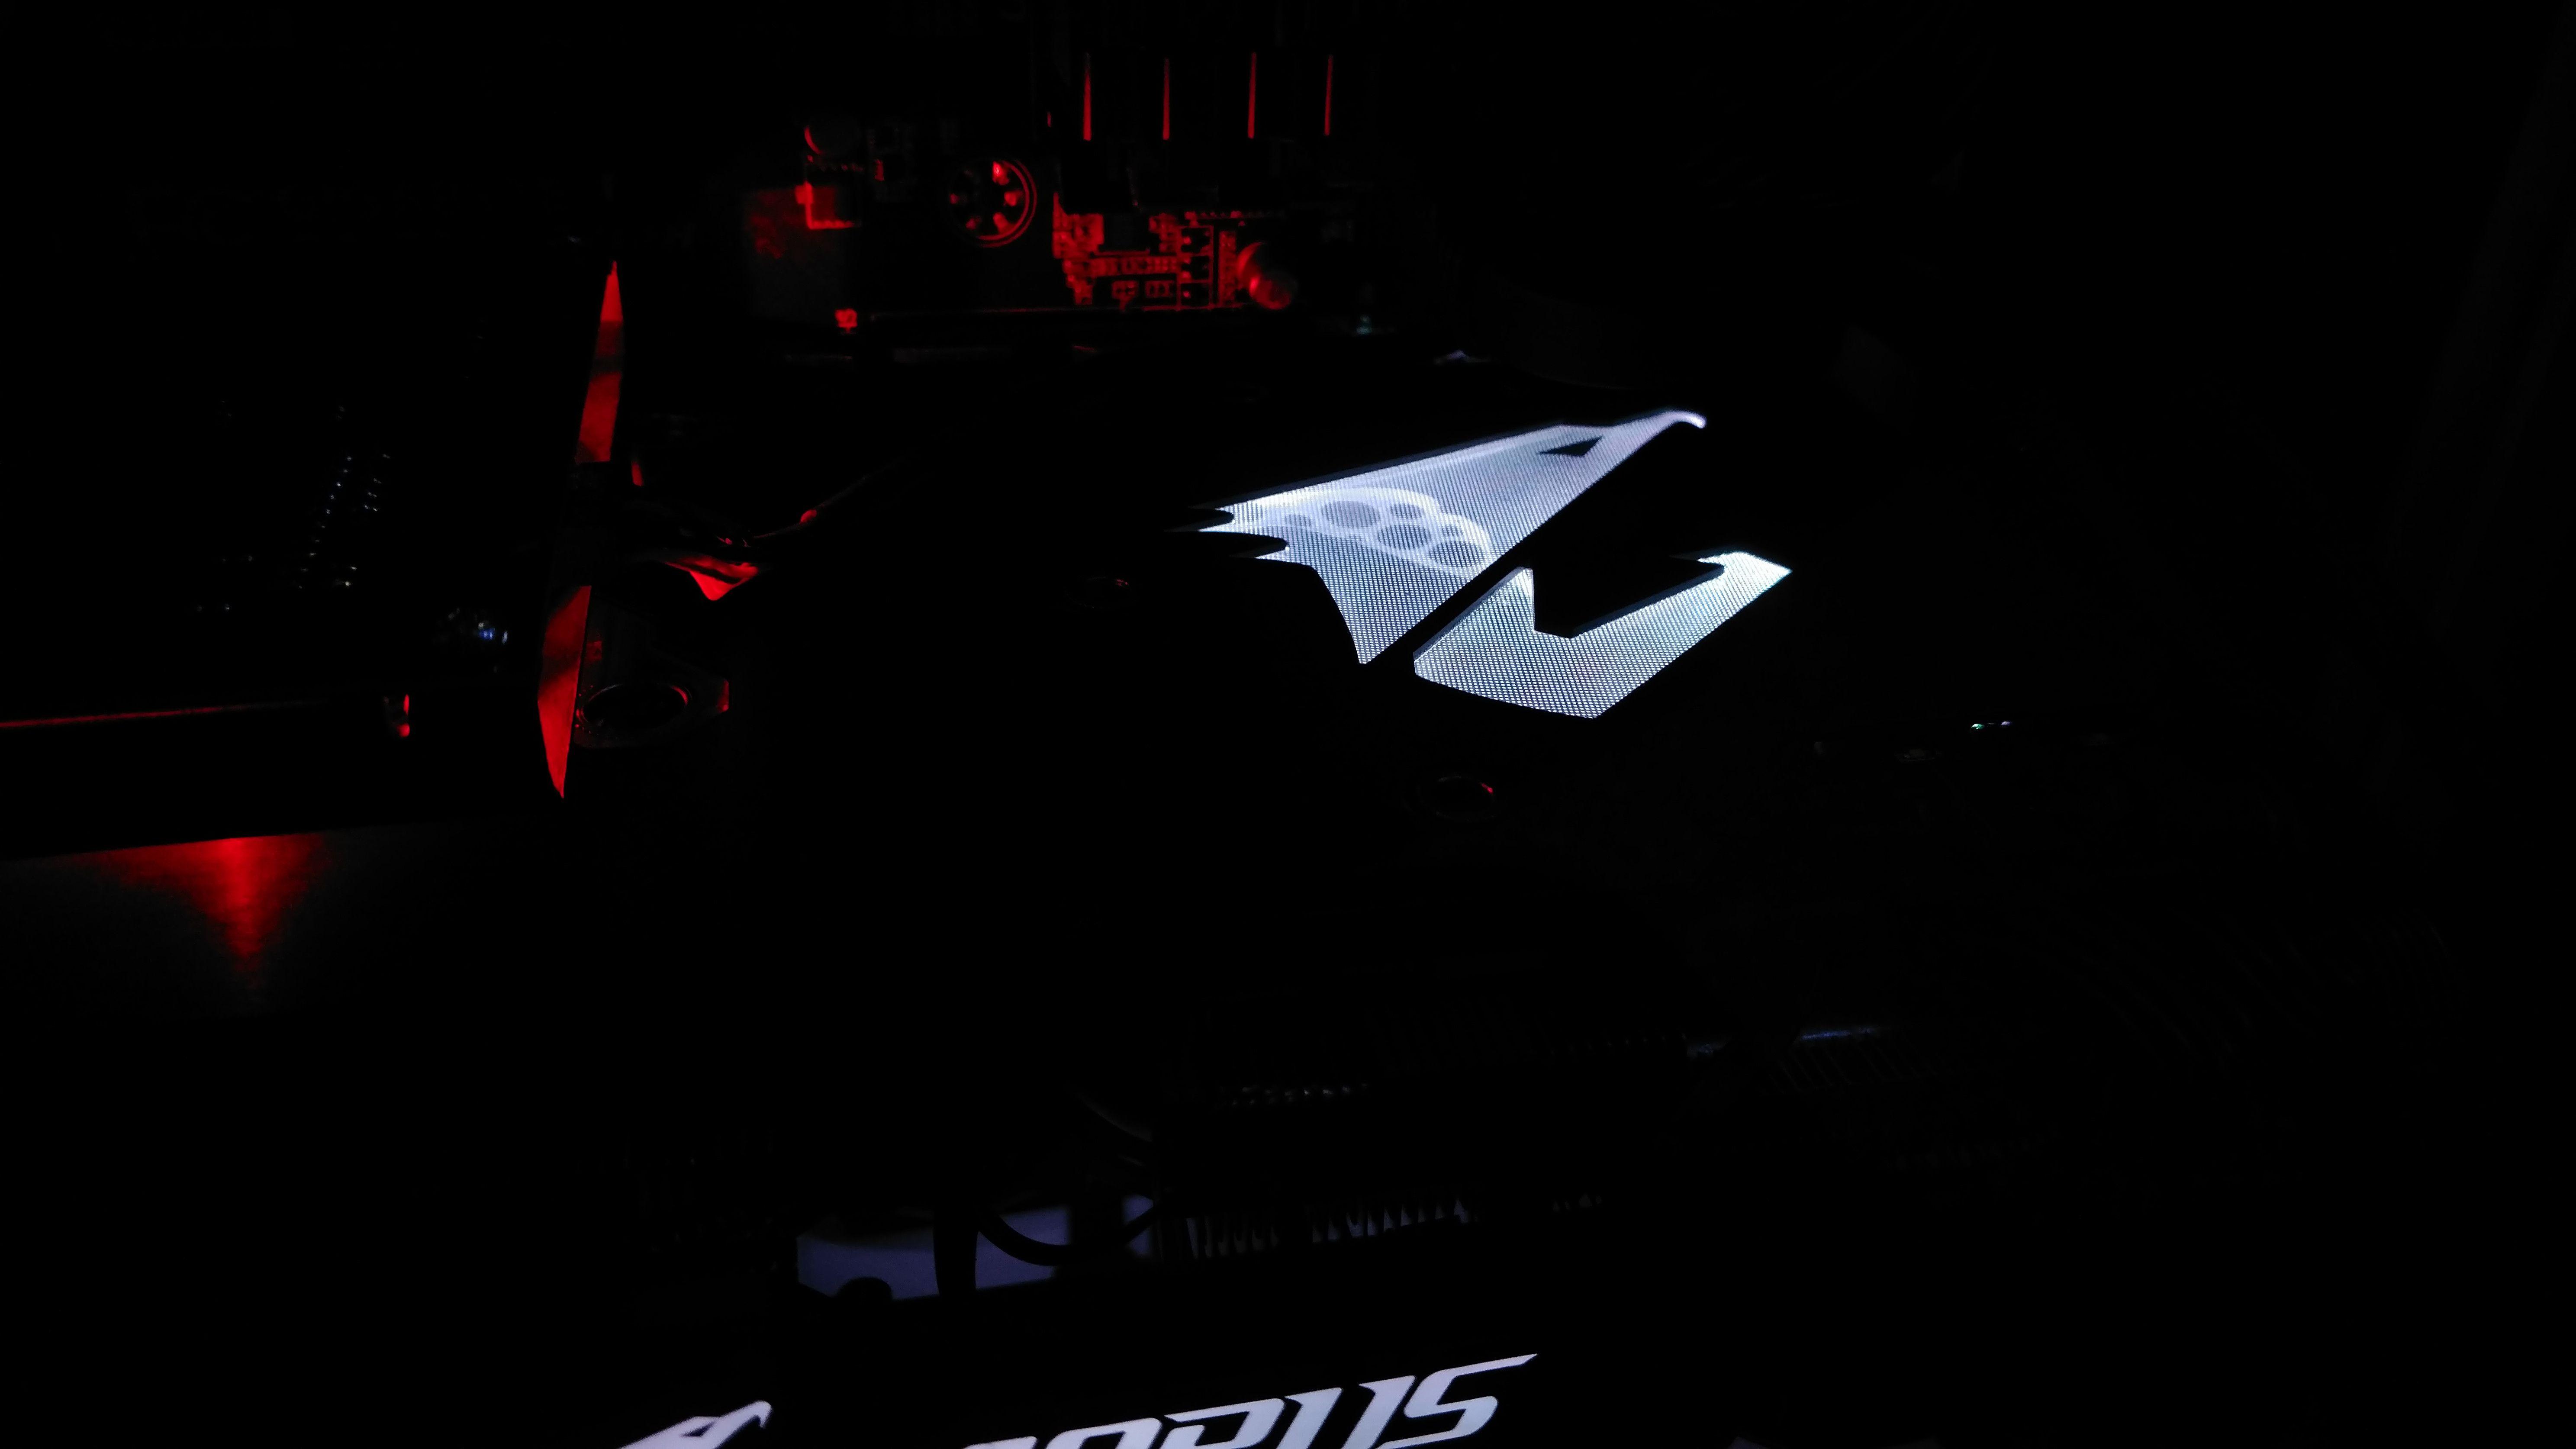 Sooo... is the Aorus logo on the 1080 Ti Xtreme backplate supposed